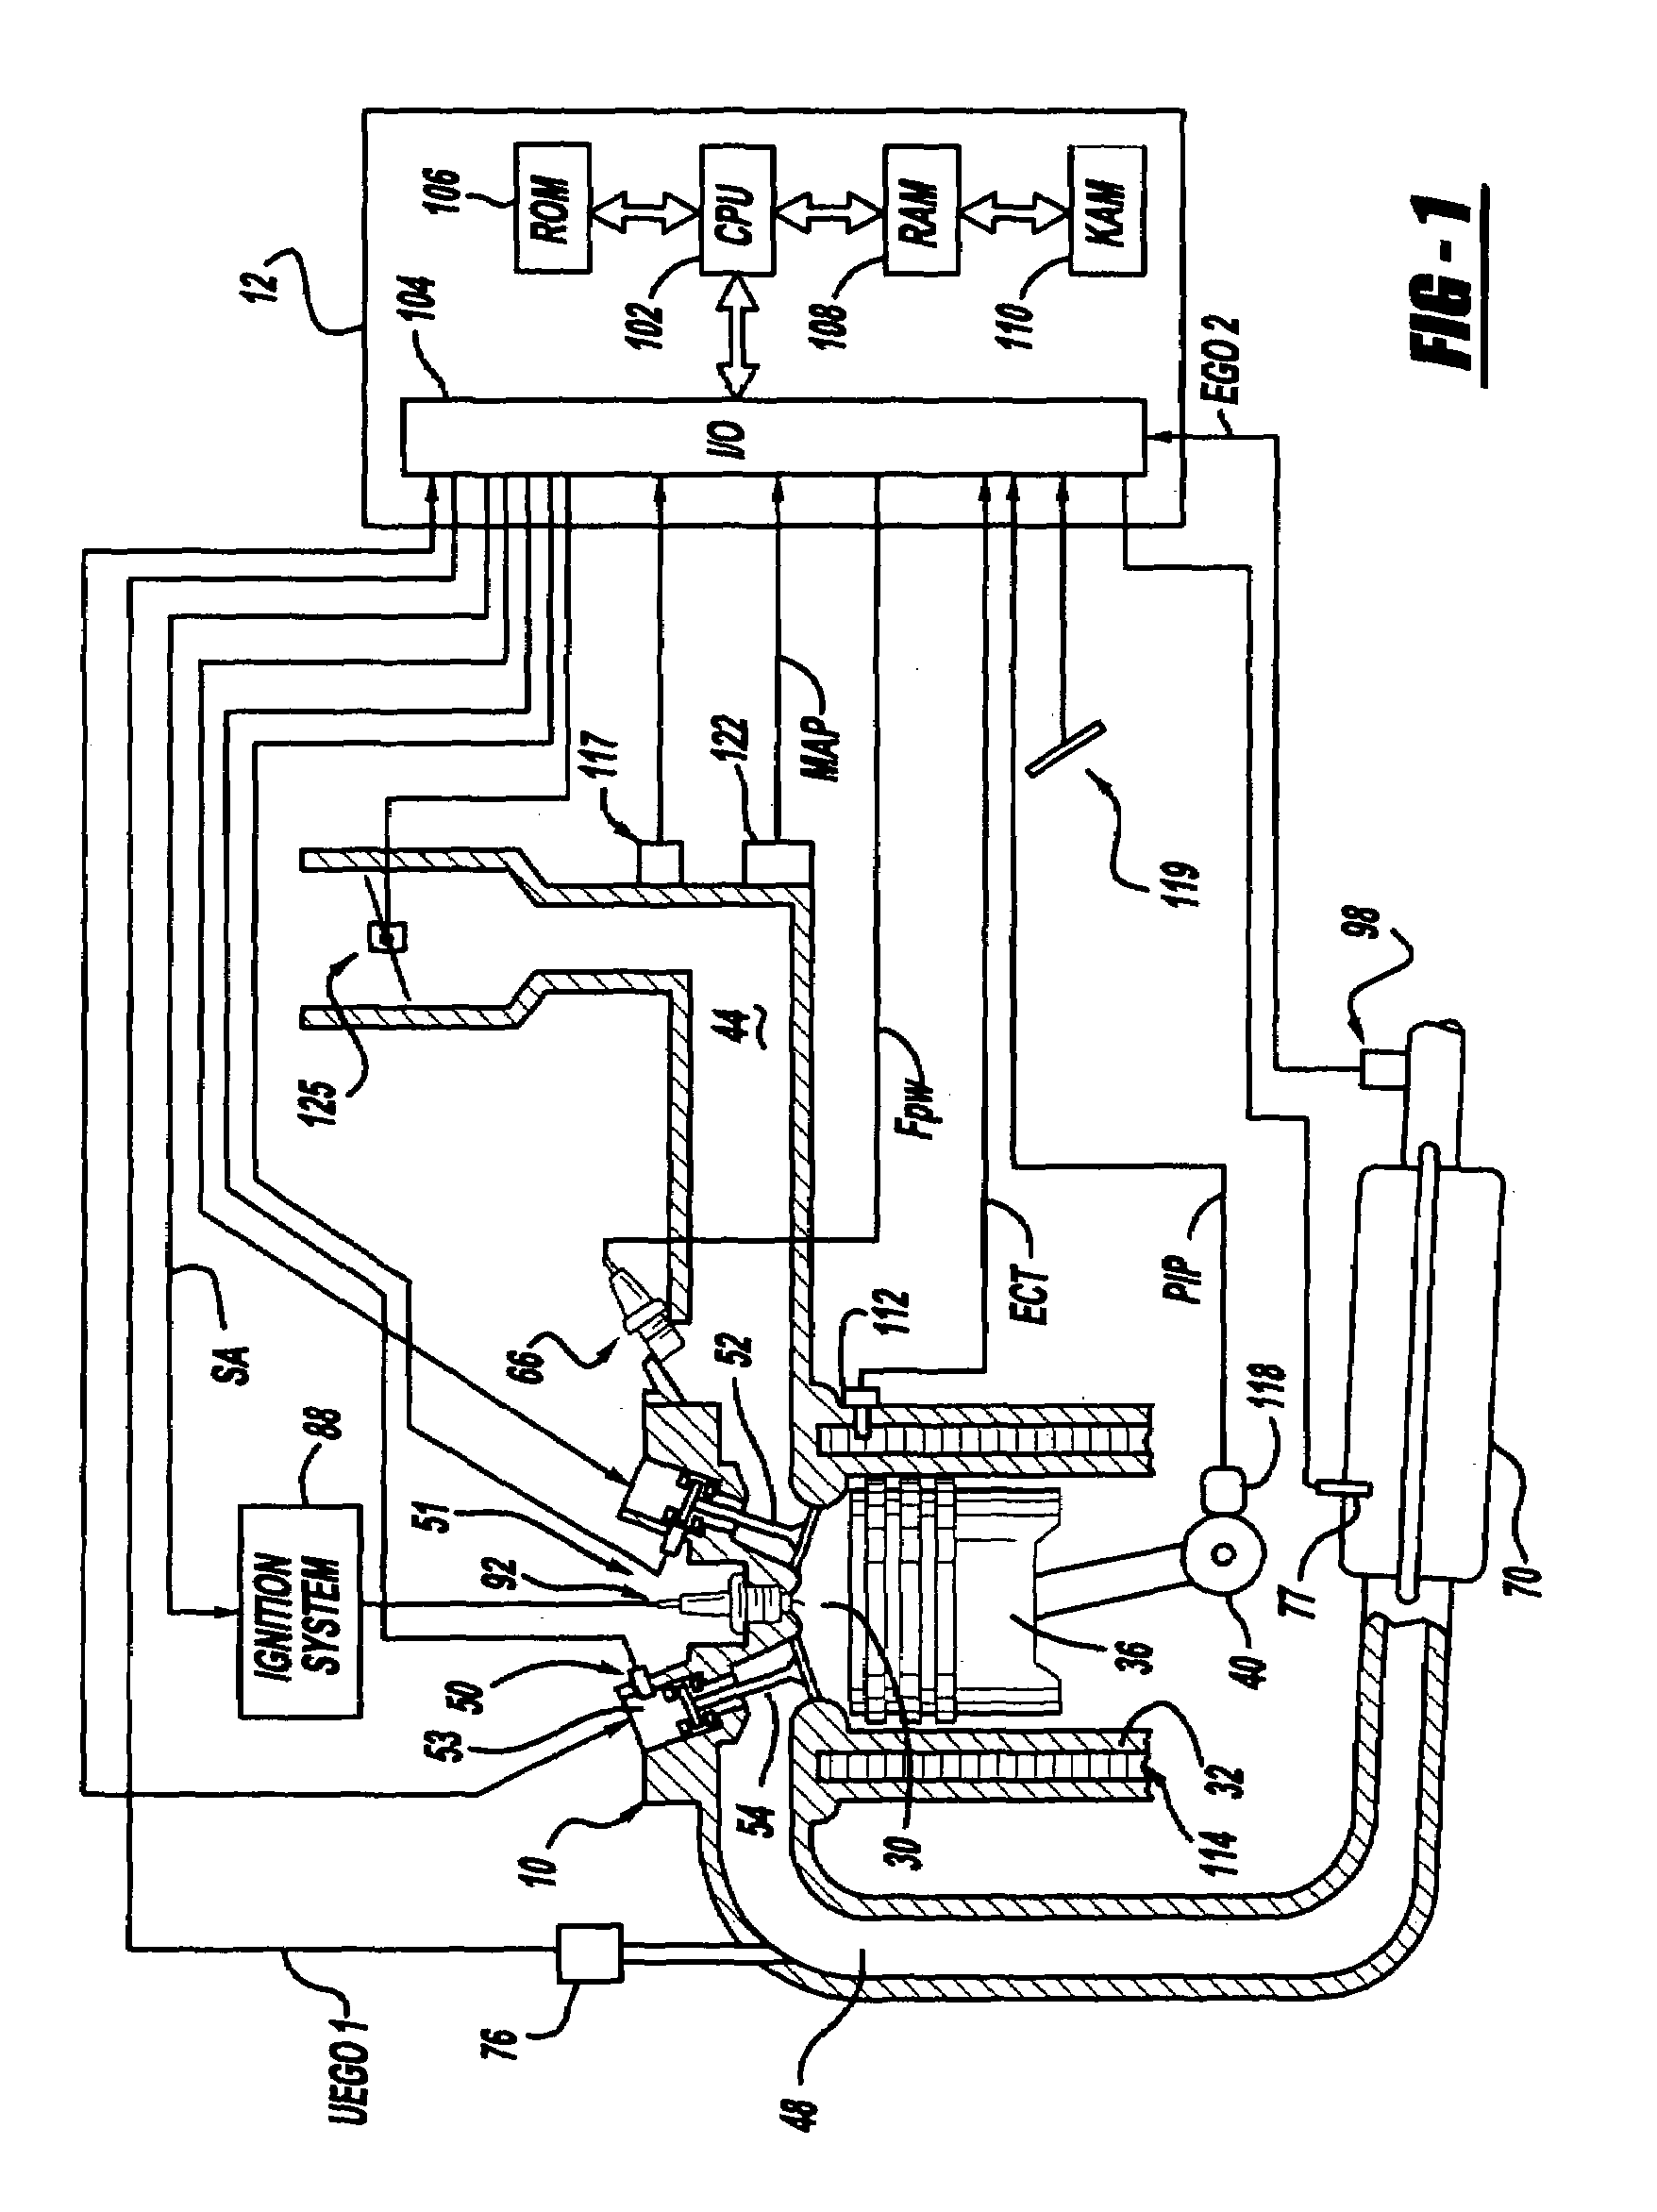 Engine air-fuel control for an engine with valves that may be deactivated